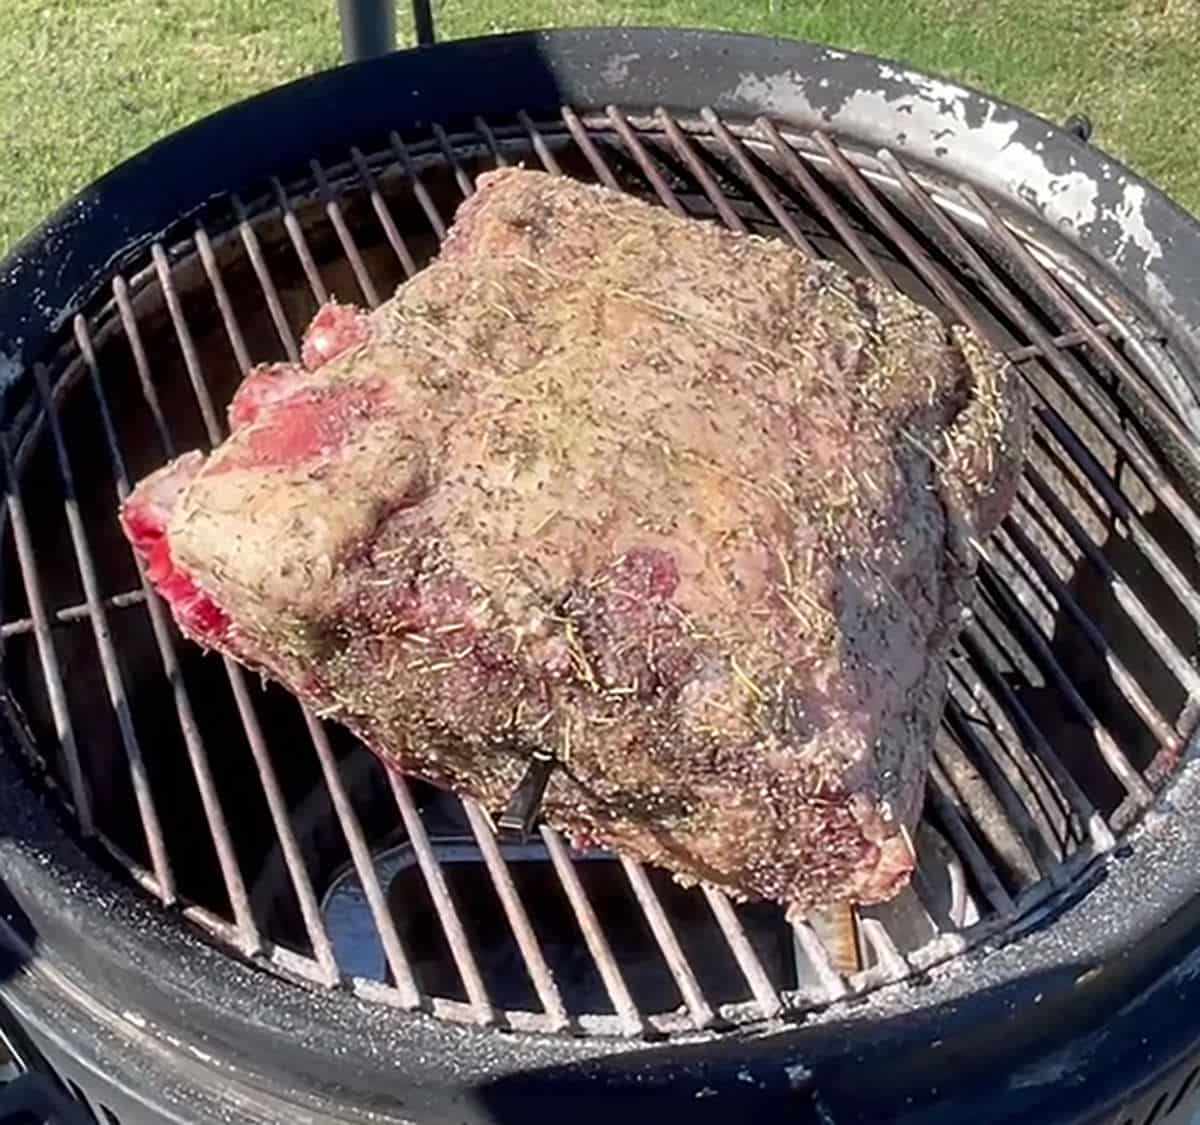 Smoked prime rib on a grill.